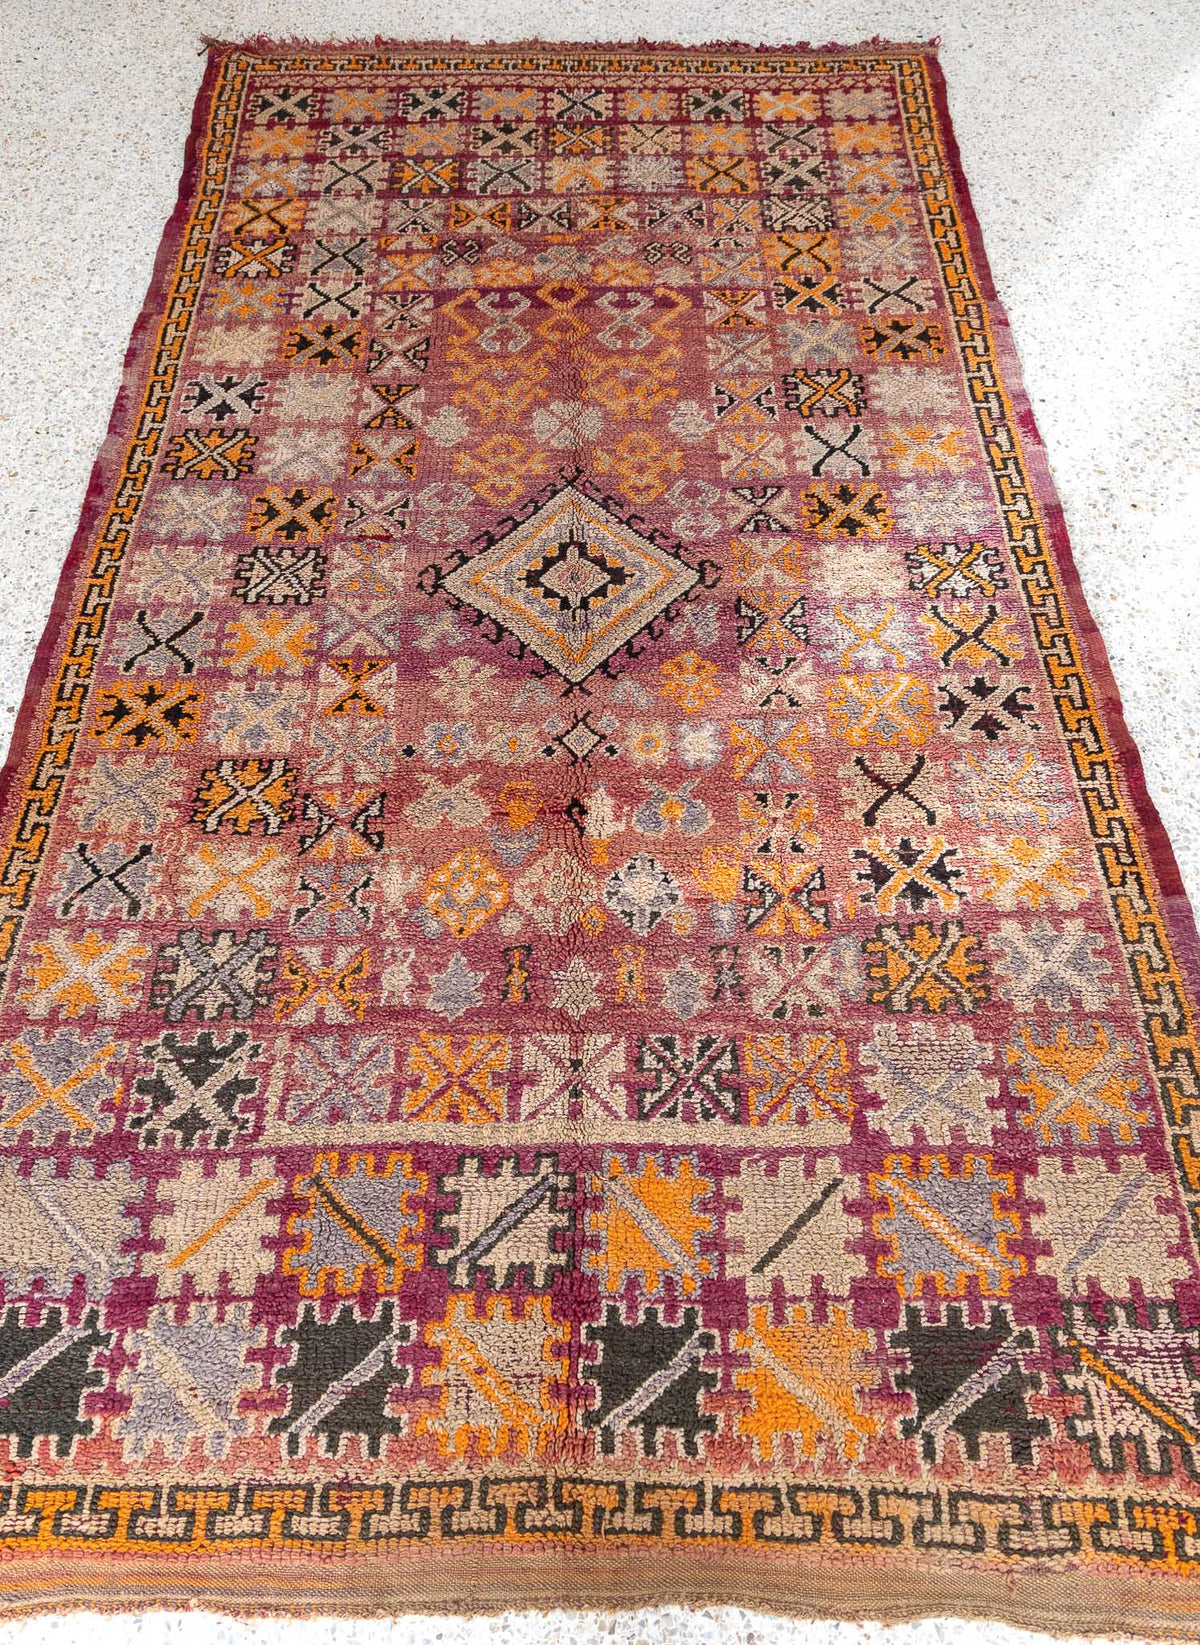 The carpet is a real feast for the eyes, with a mixture of colors and Berber signs in a sophisticated and elegant composition. The design is dense and intricate, with a symmetrical pattern that has variations in the organization of the composition. The rug features a central diamond surrounded by a rectangular frame with a different pattern, which adds an interesting visual element to the composition.  faded color palette from rosy background to yellowish beige, and dark.